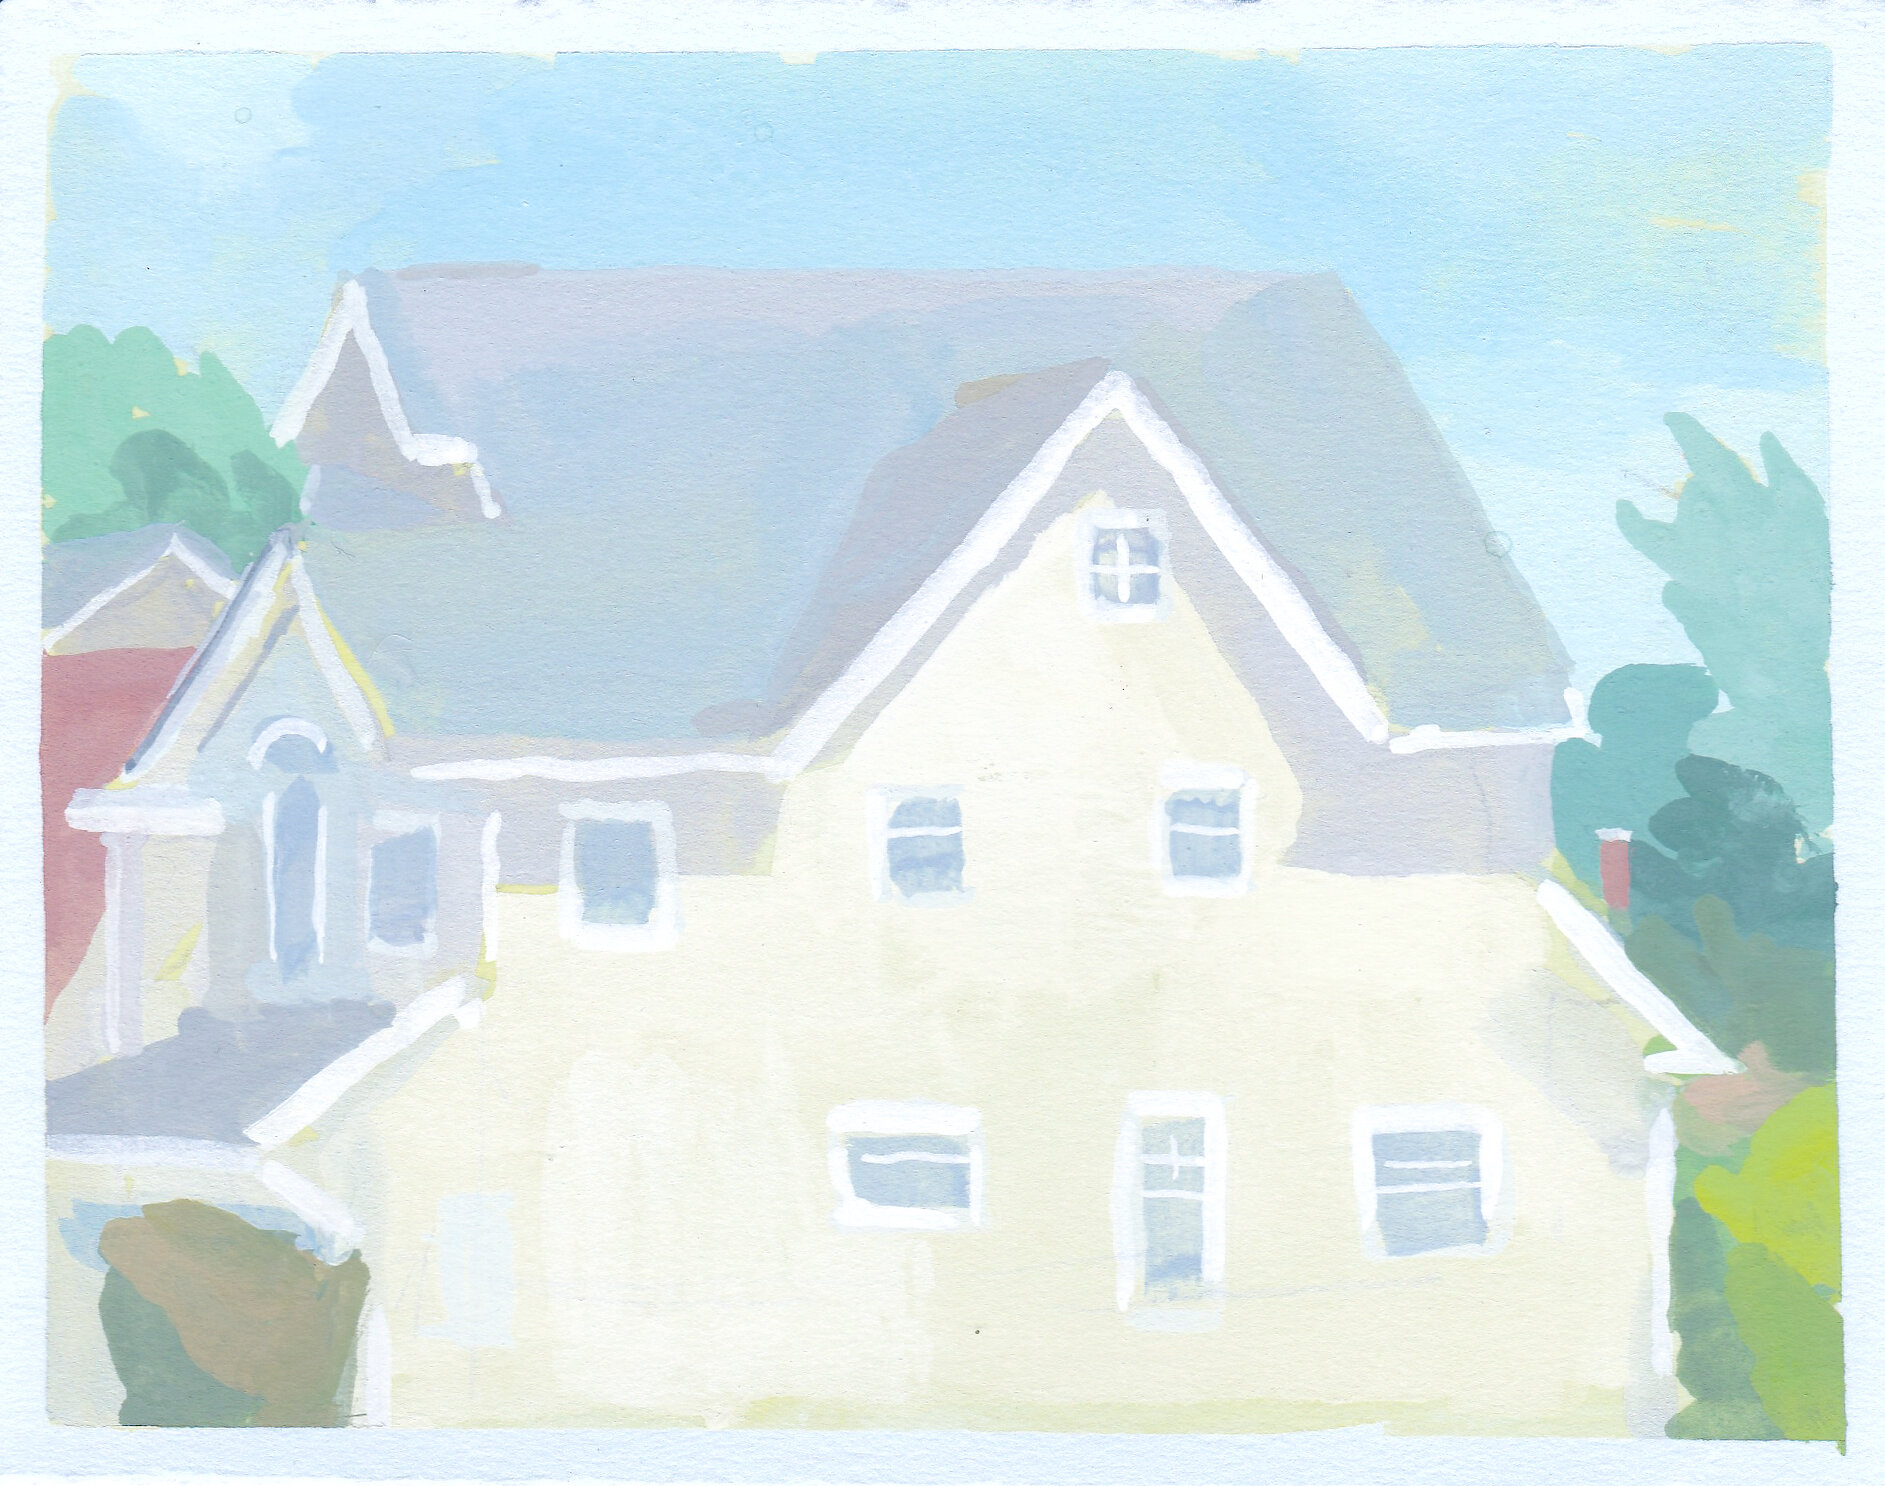    Yellow House in Manasquan   gouache on paper 4.5 x 6” 2019    purchase  